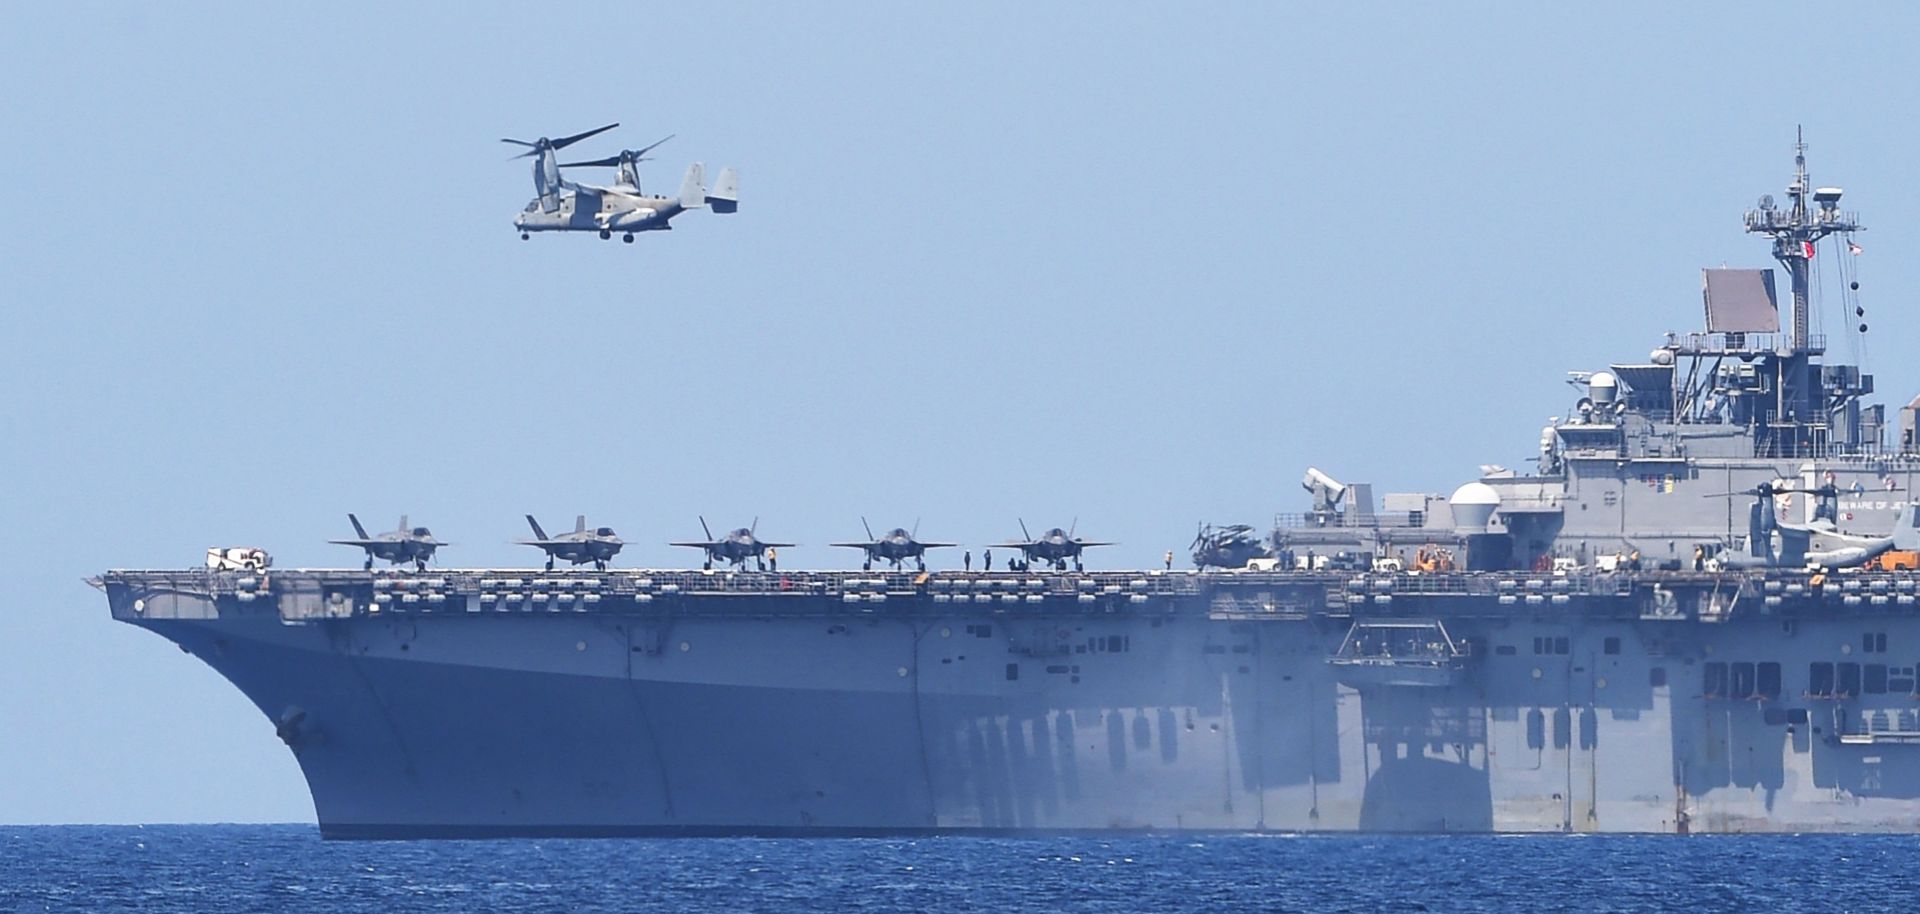 A helicopter takes off from a U.S. Navy vessel during joint U.S.-Philippines military exercises in waters facing the South China Sea on April 11, 2019. 